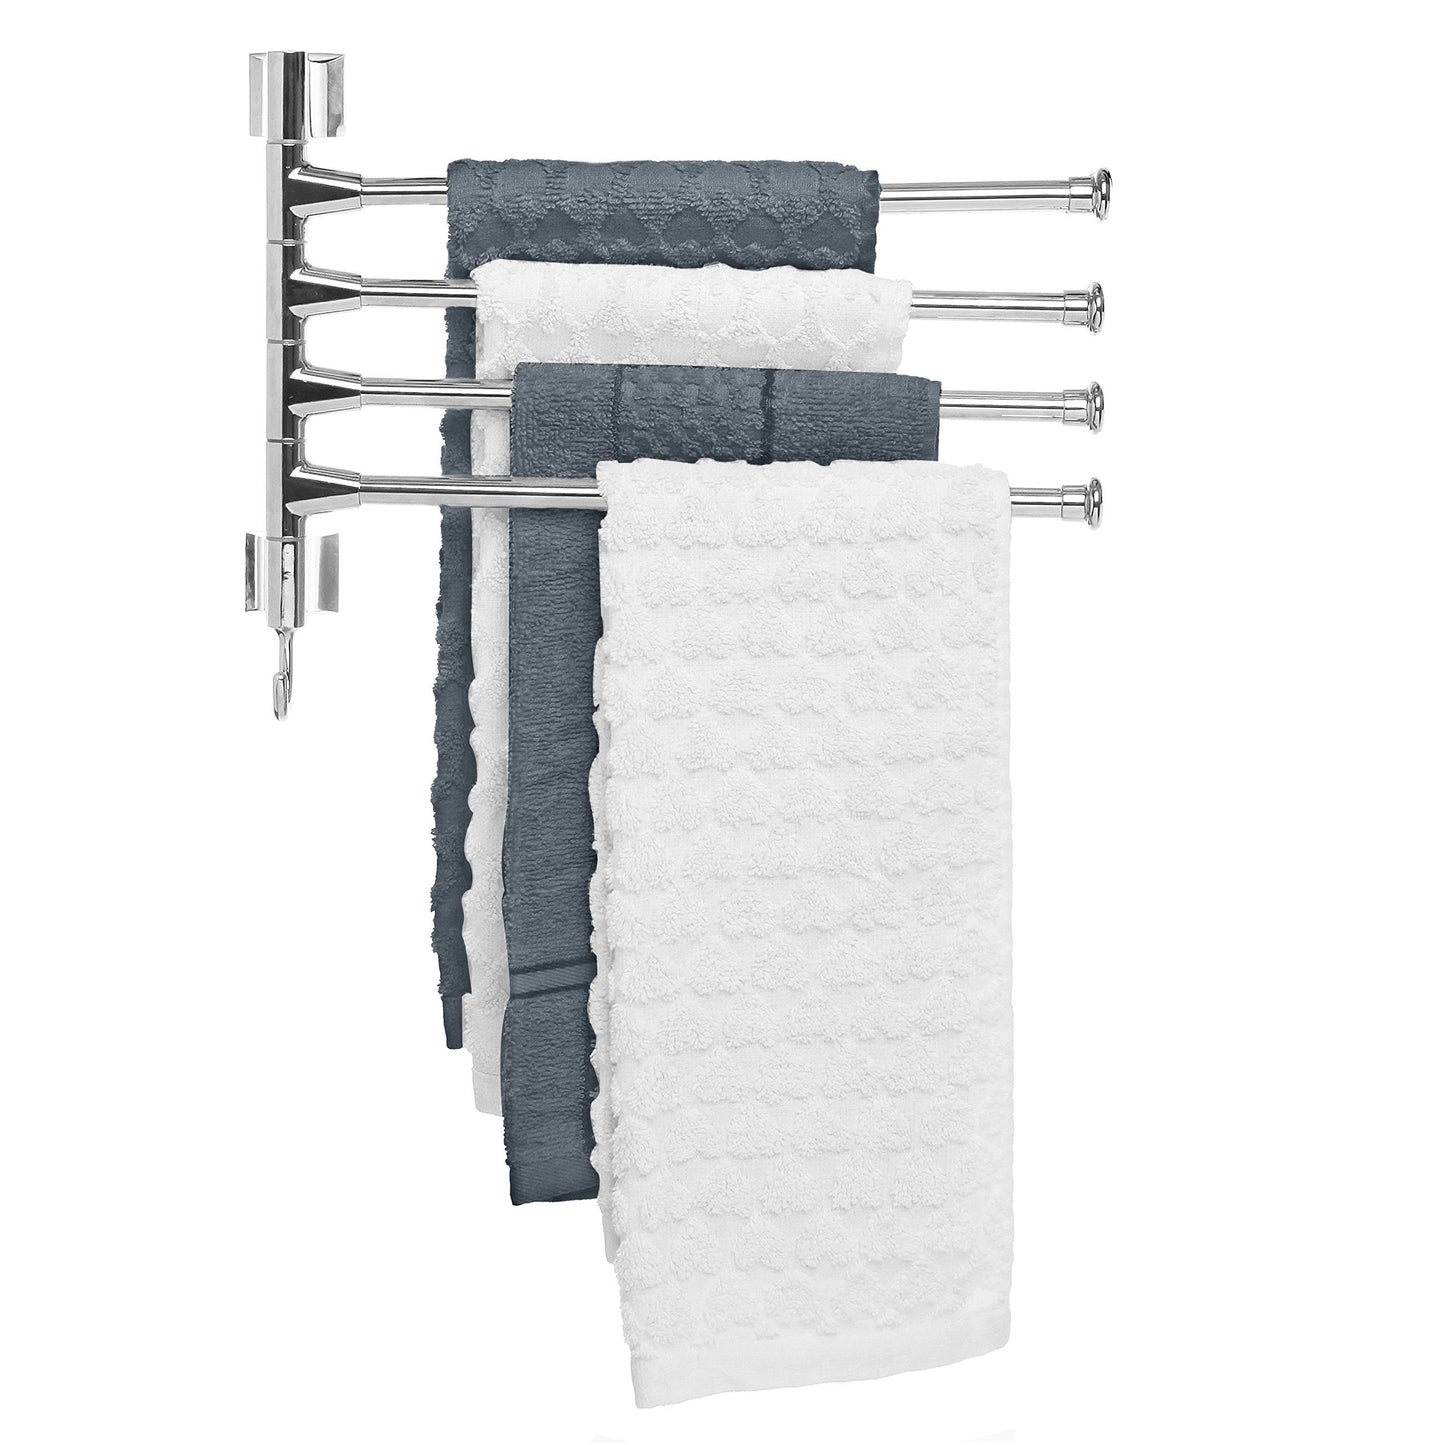 Organize with mygift wall mounted stainless steel swivel towel bar 4 swing arm hand towel drying rack for bathroom and kitchen